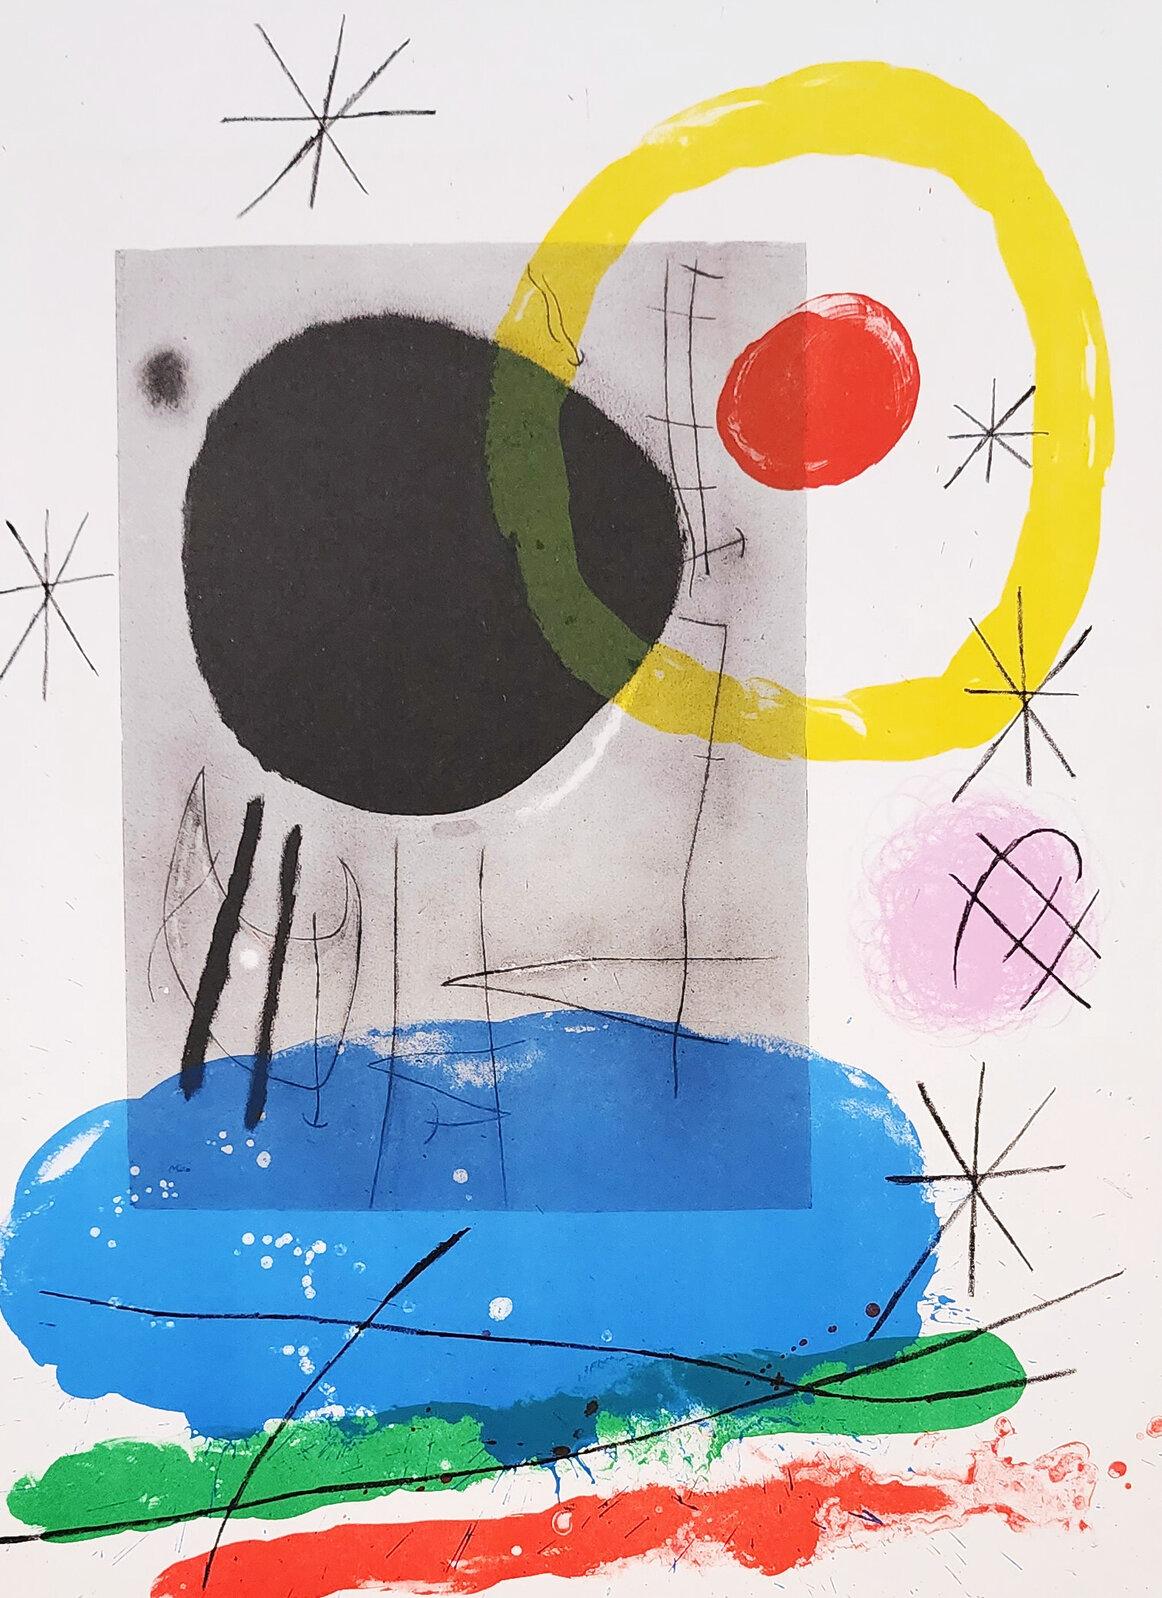 Joan Miró Abstract Print - Miro, Composition, 1965 (Mourlot 435) (after)